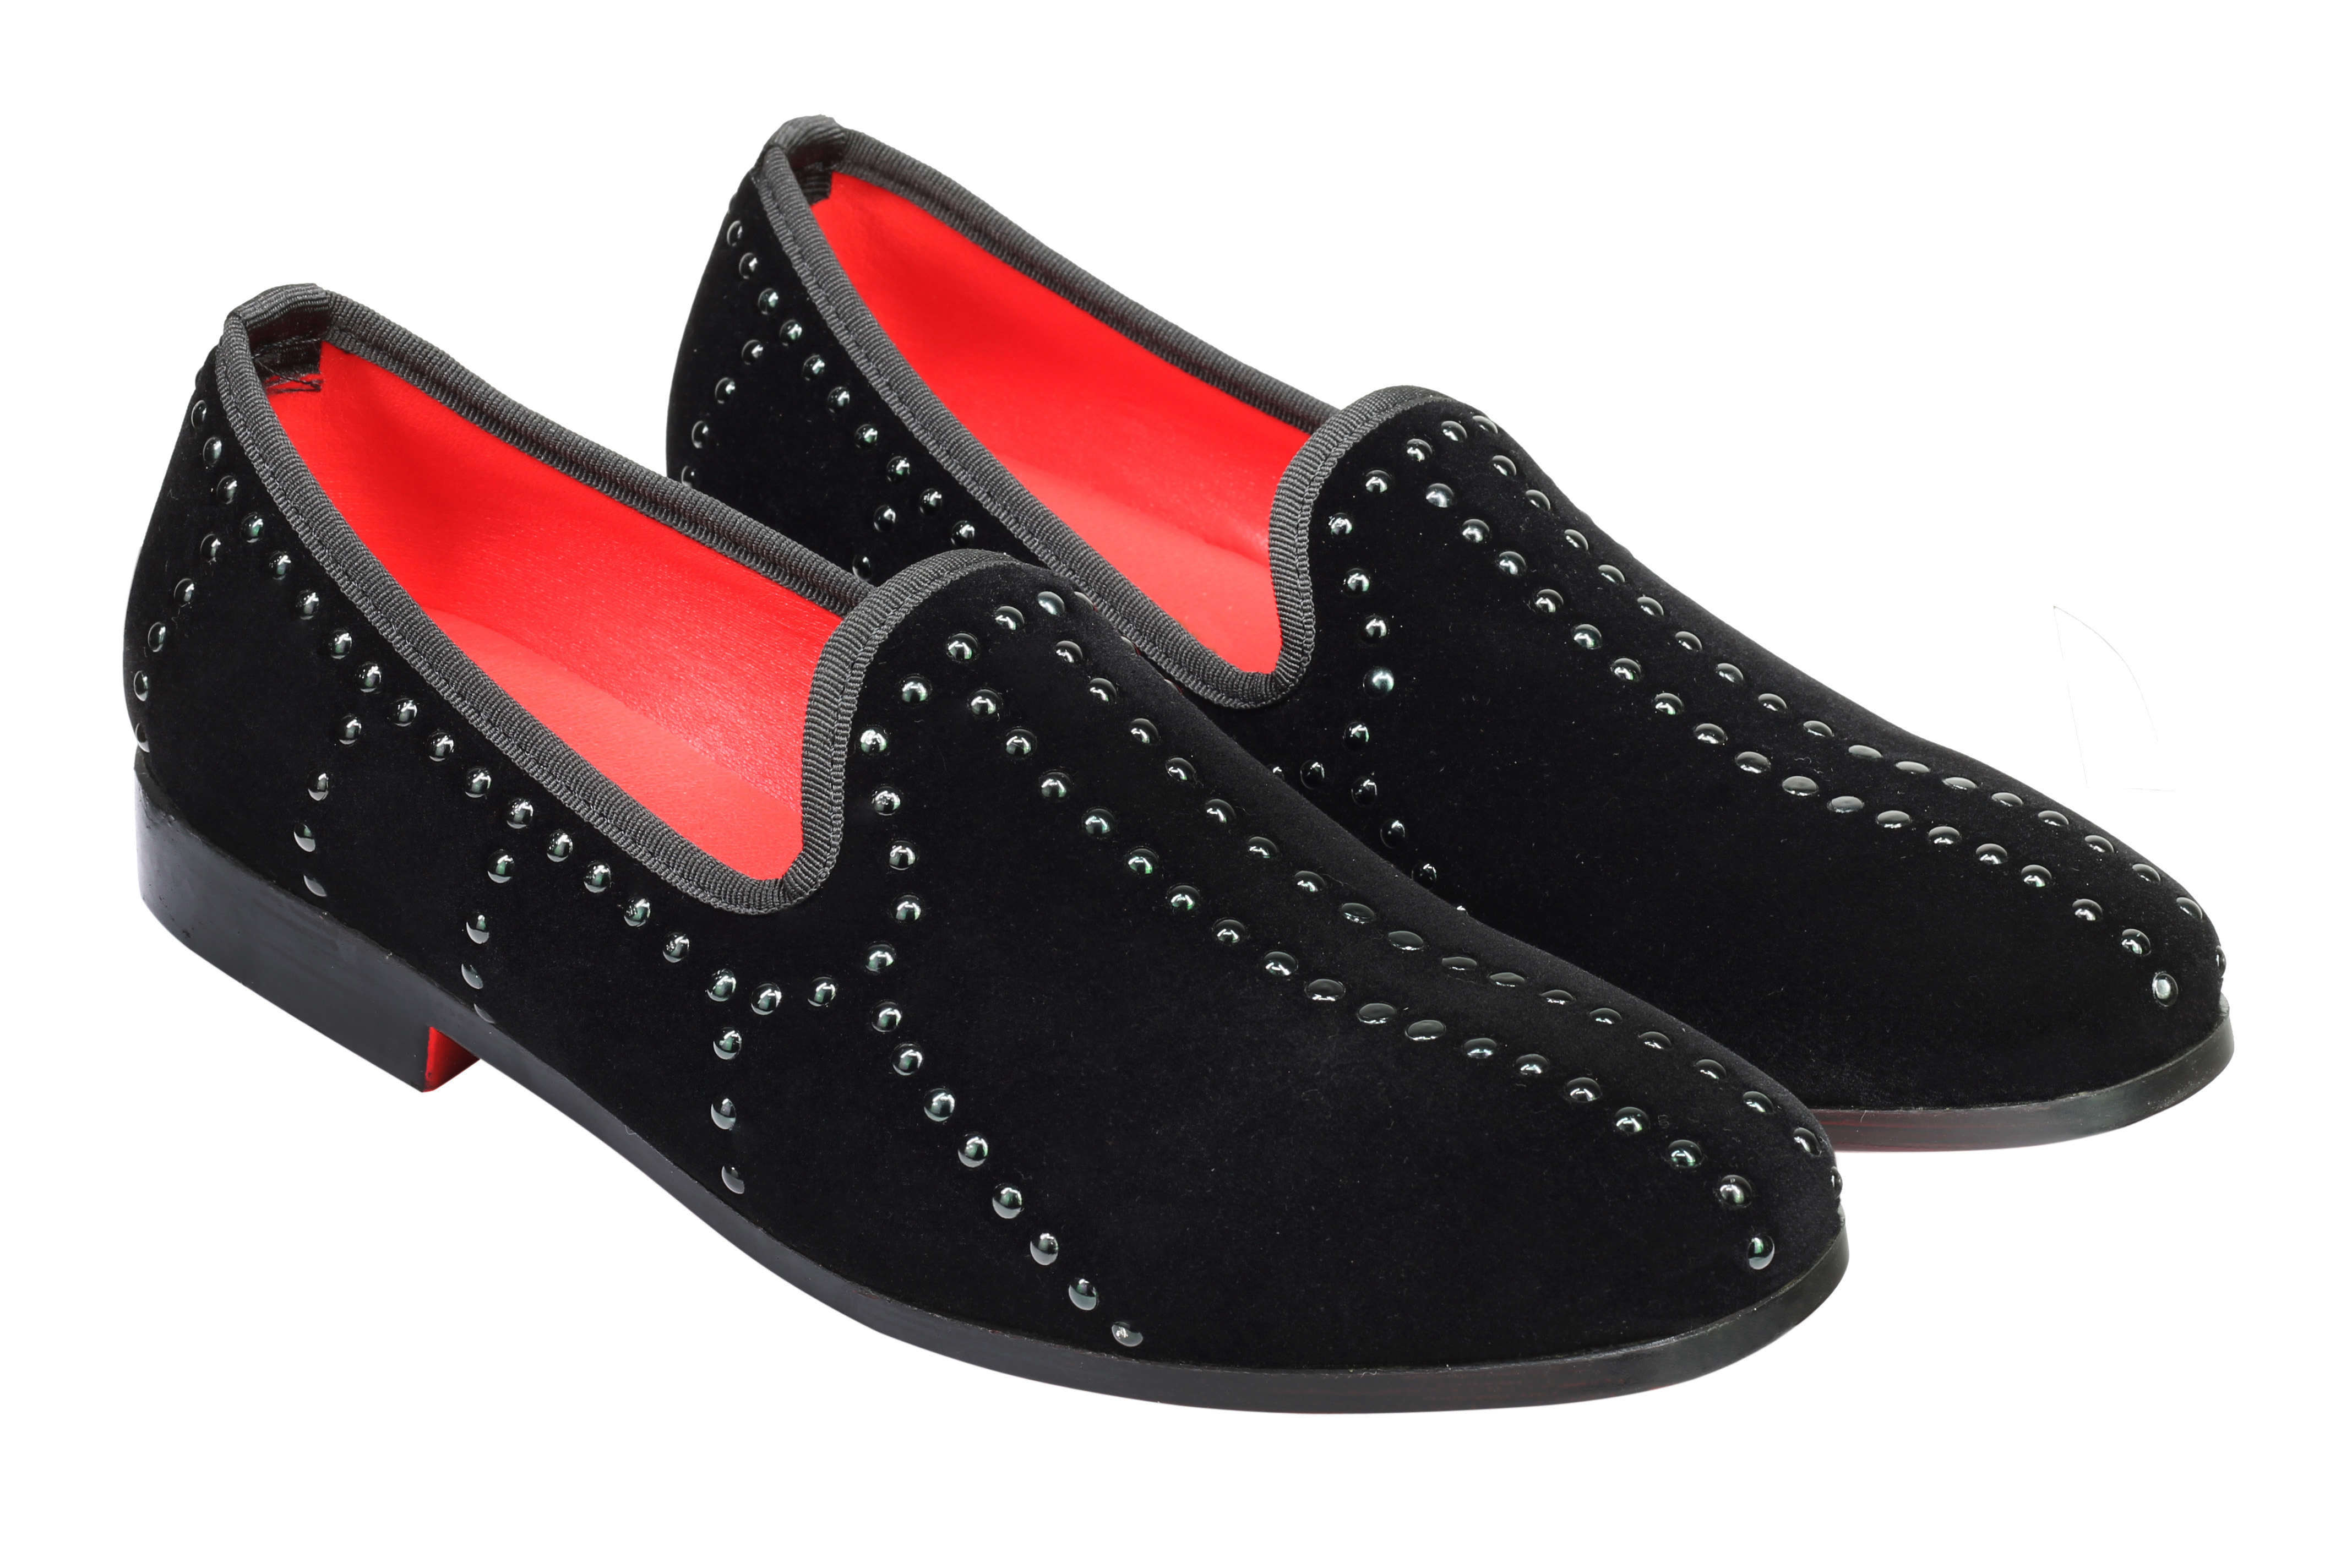 Mens Black Suede Loafers Faux Leather Studs Retro Smoking Slippers Slip On Shoes